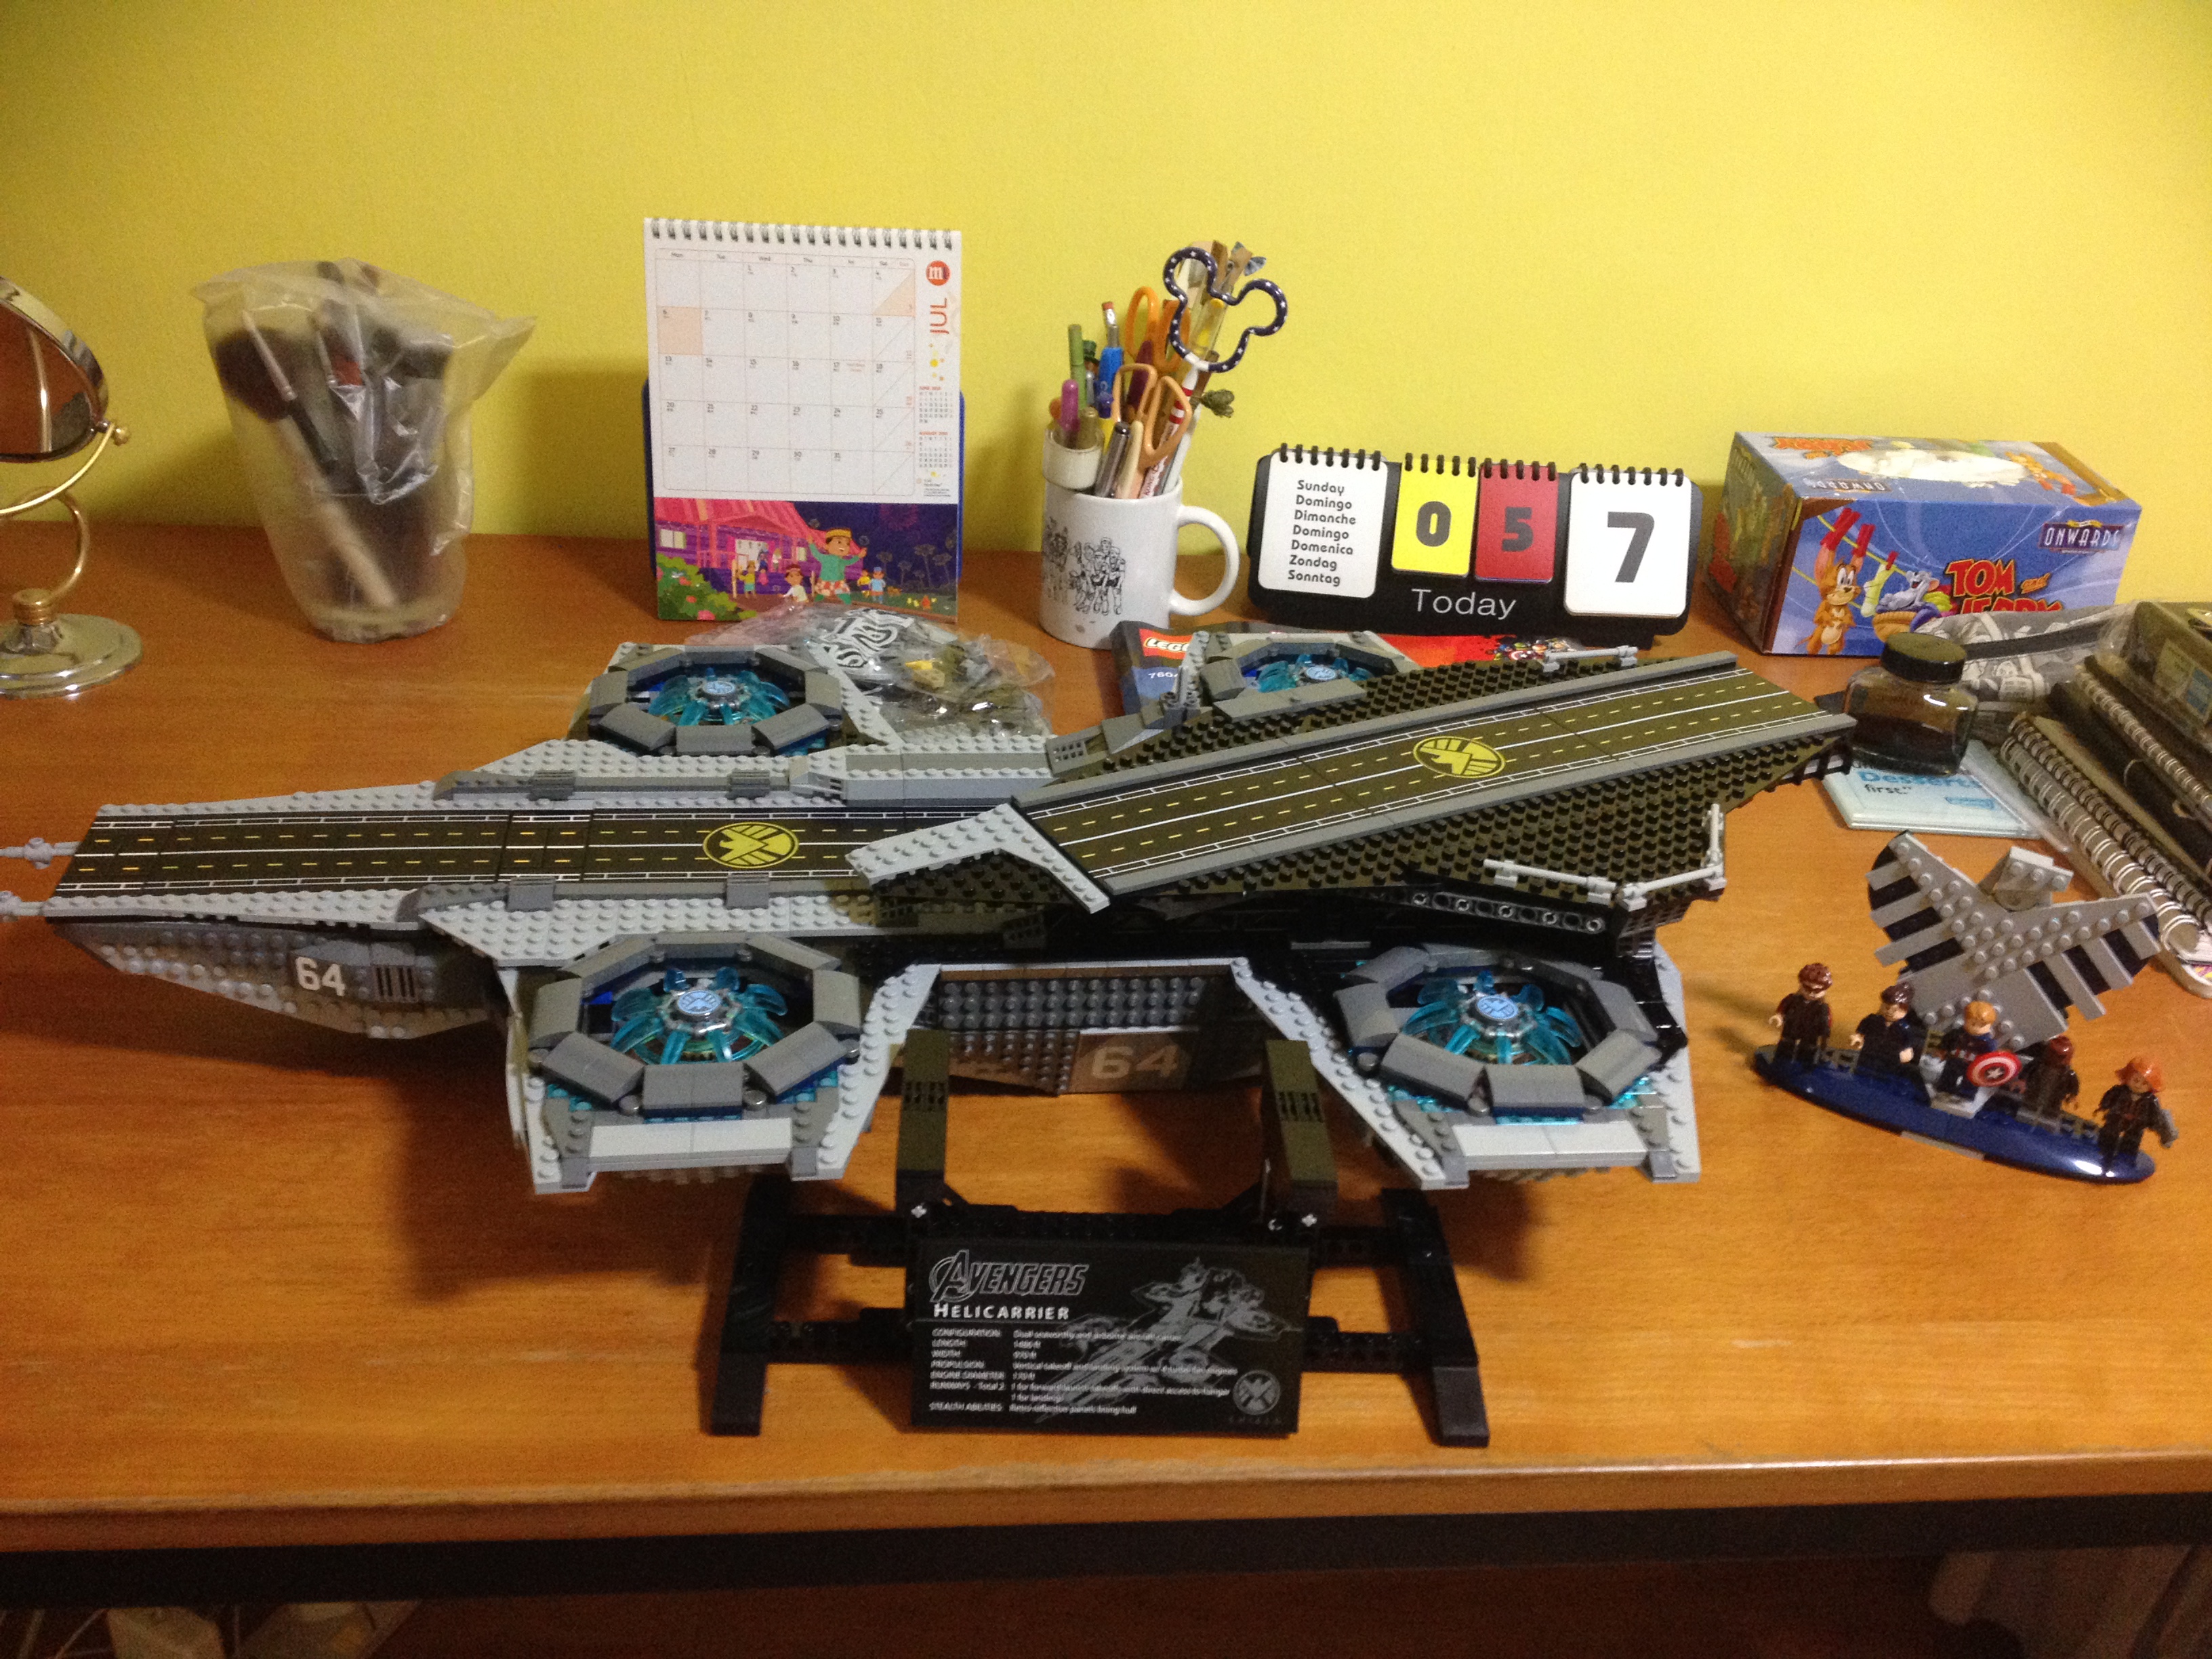 Almost done with Lego SHIELD Helicarrier